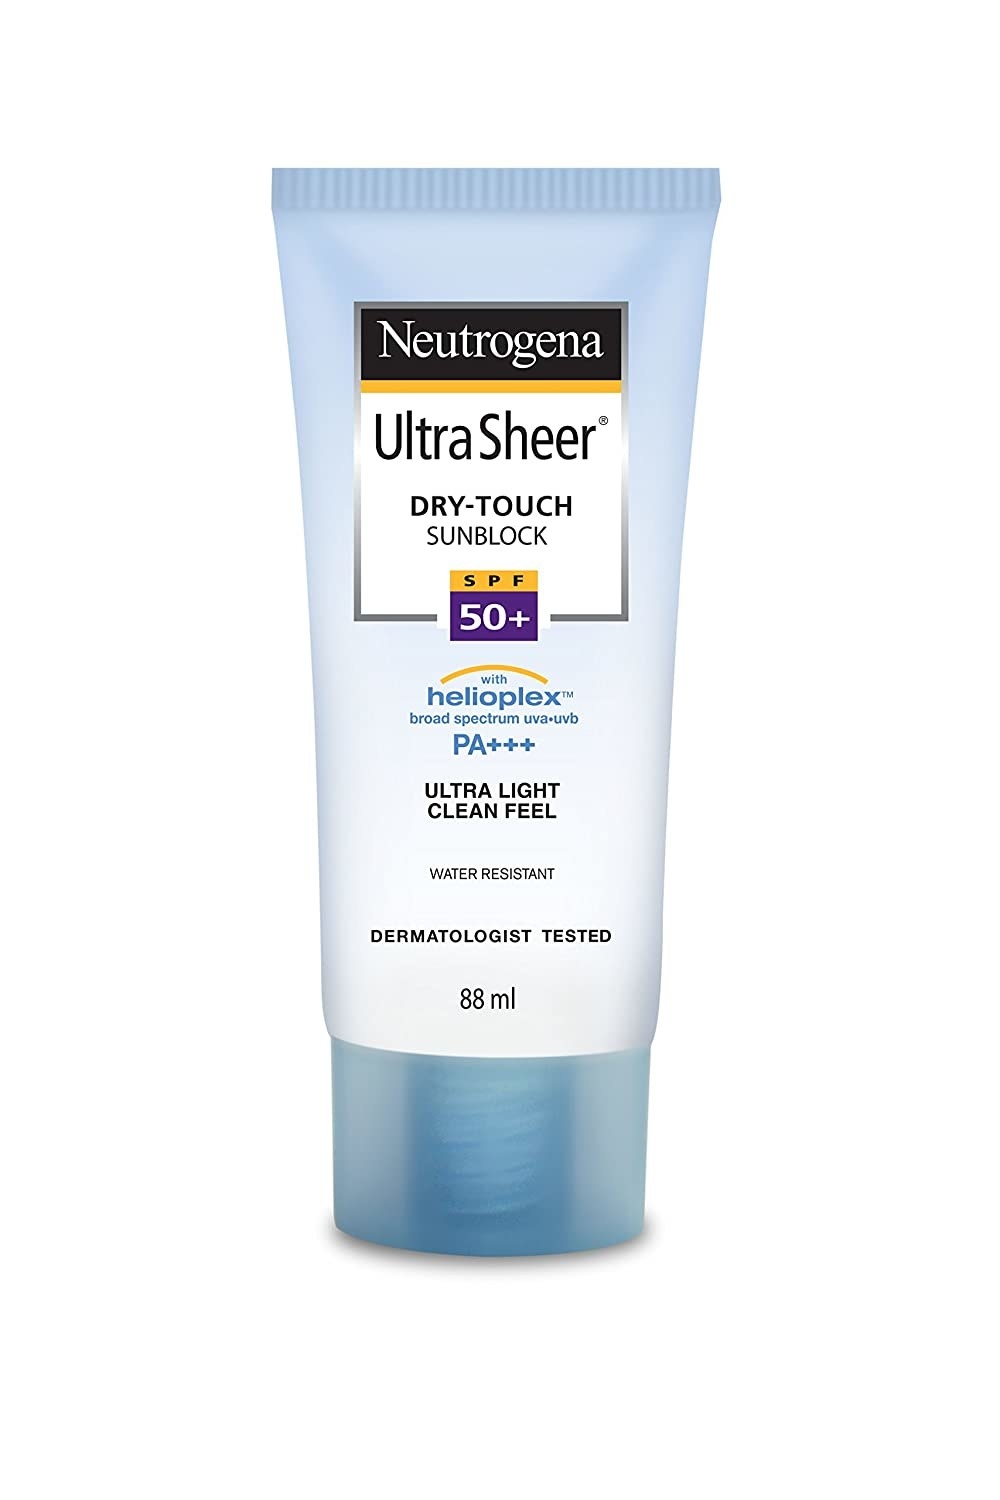 Neutrogena ultra sheer dry touch sunblock with SPF 50+